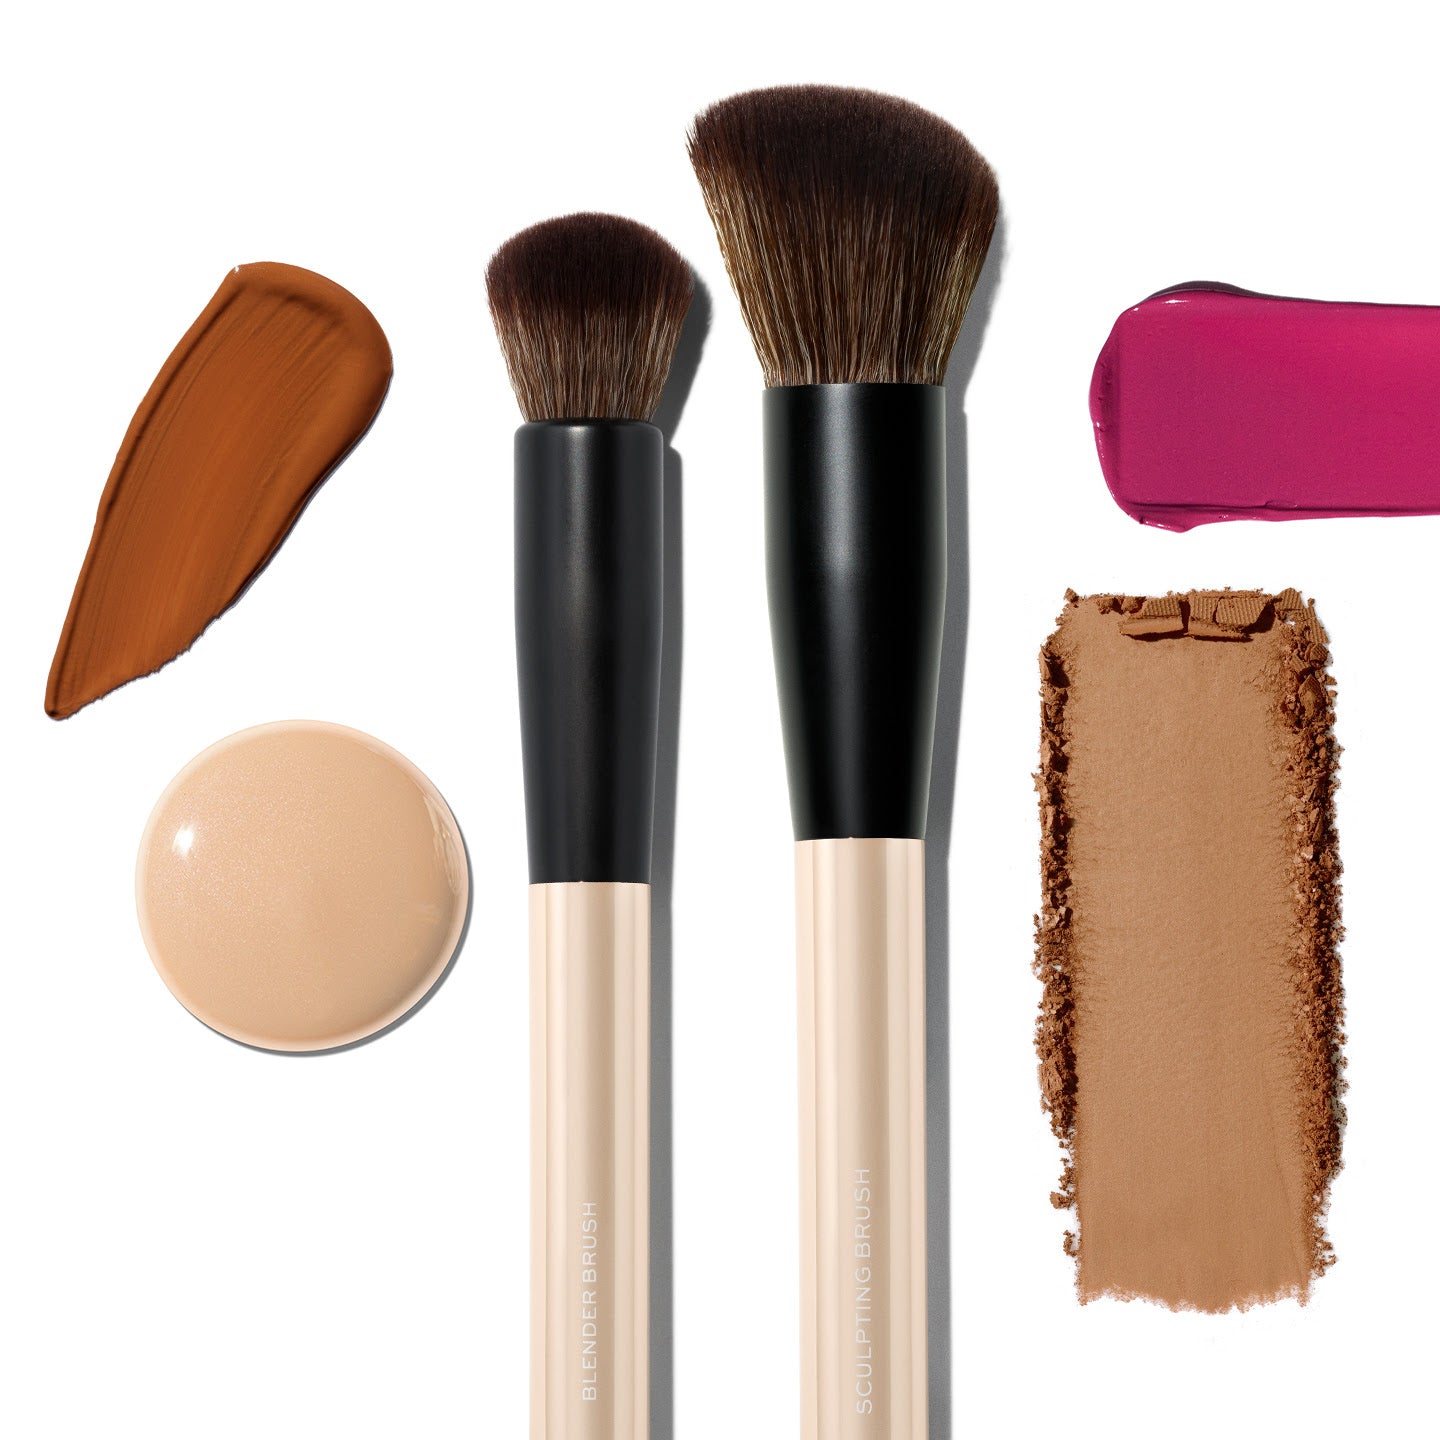 complexion makeup brushes